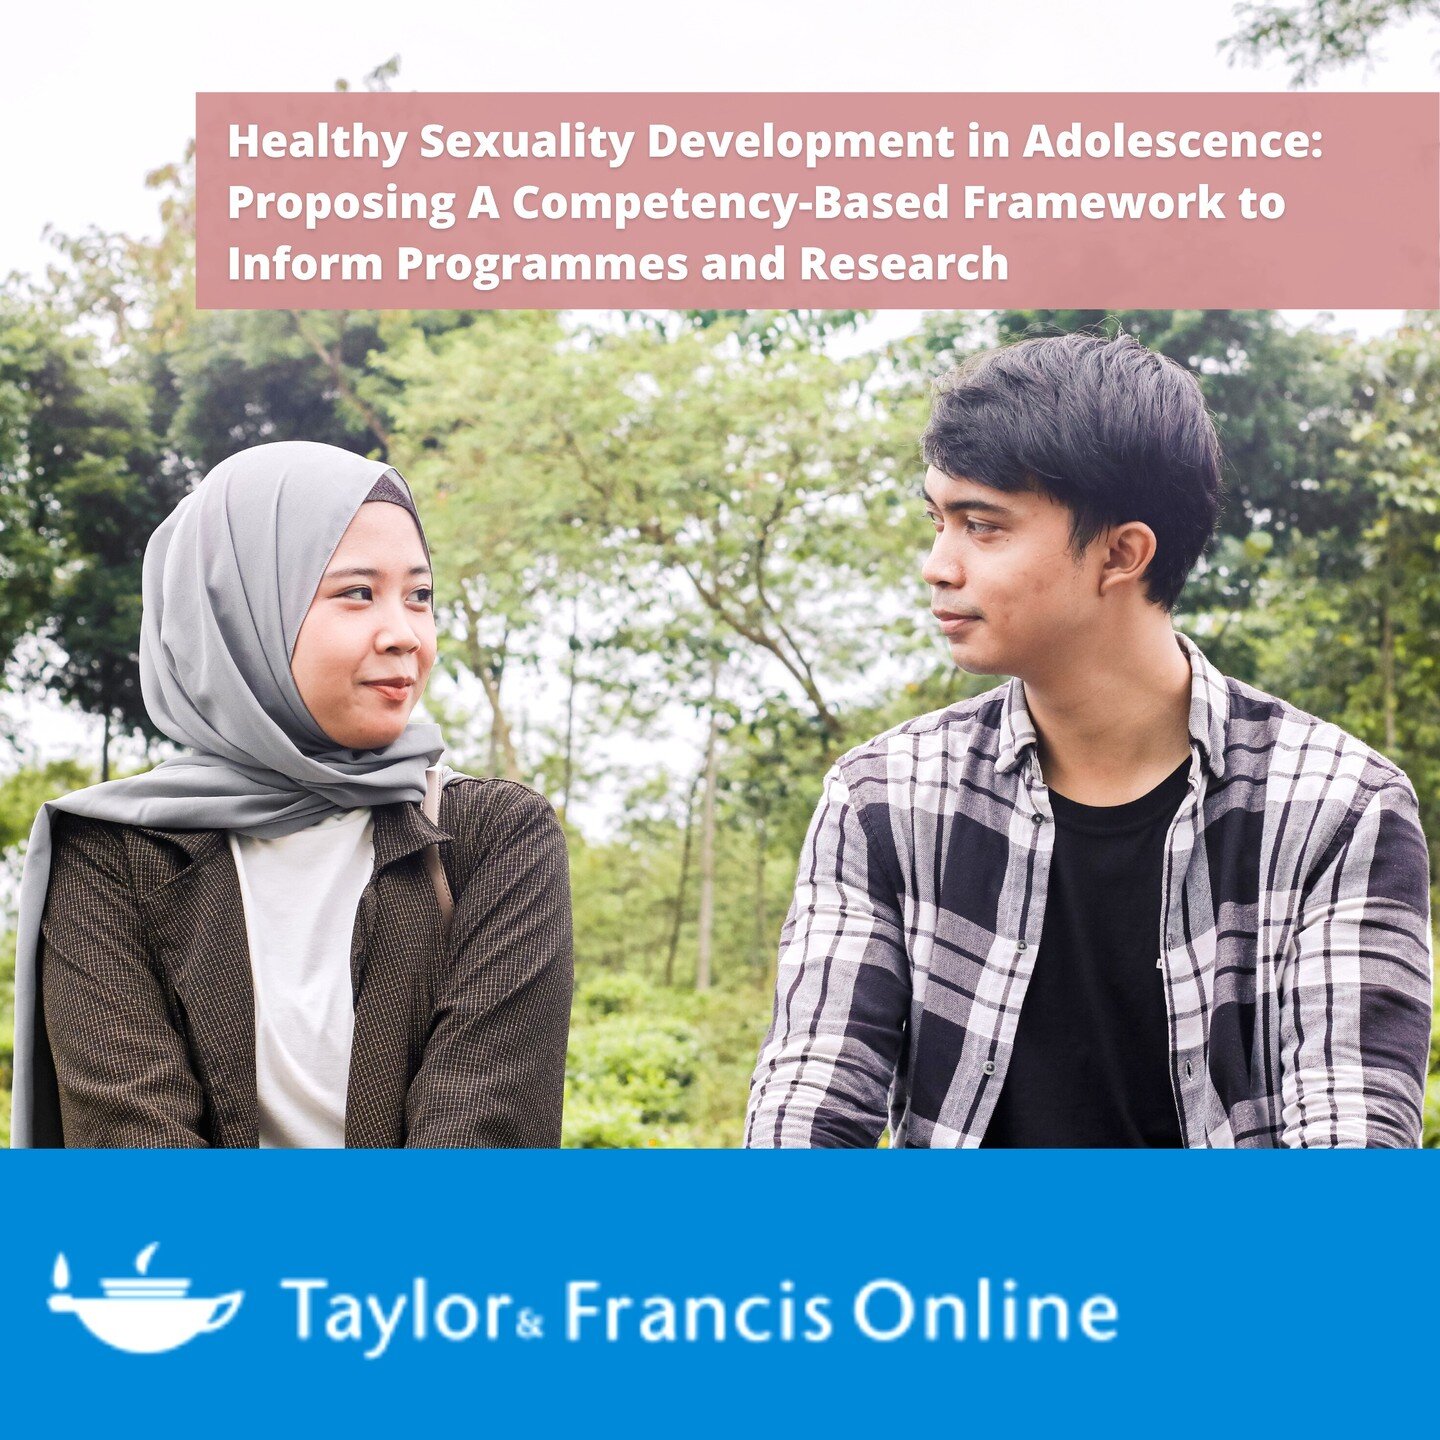 We propose a framework that draws on research related to positive youth development, empowerment, human rights, gender, and life-course perspectives. This framework can provide concrete direction for sexual and reproductive health practitioners and r